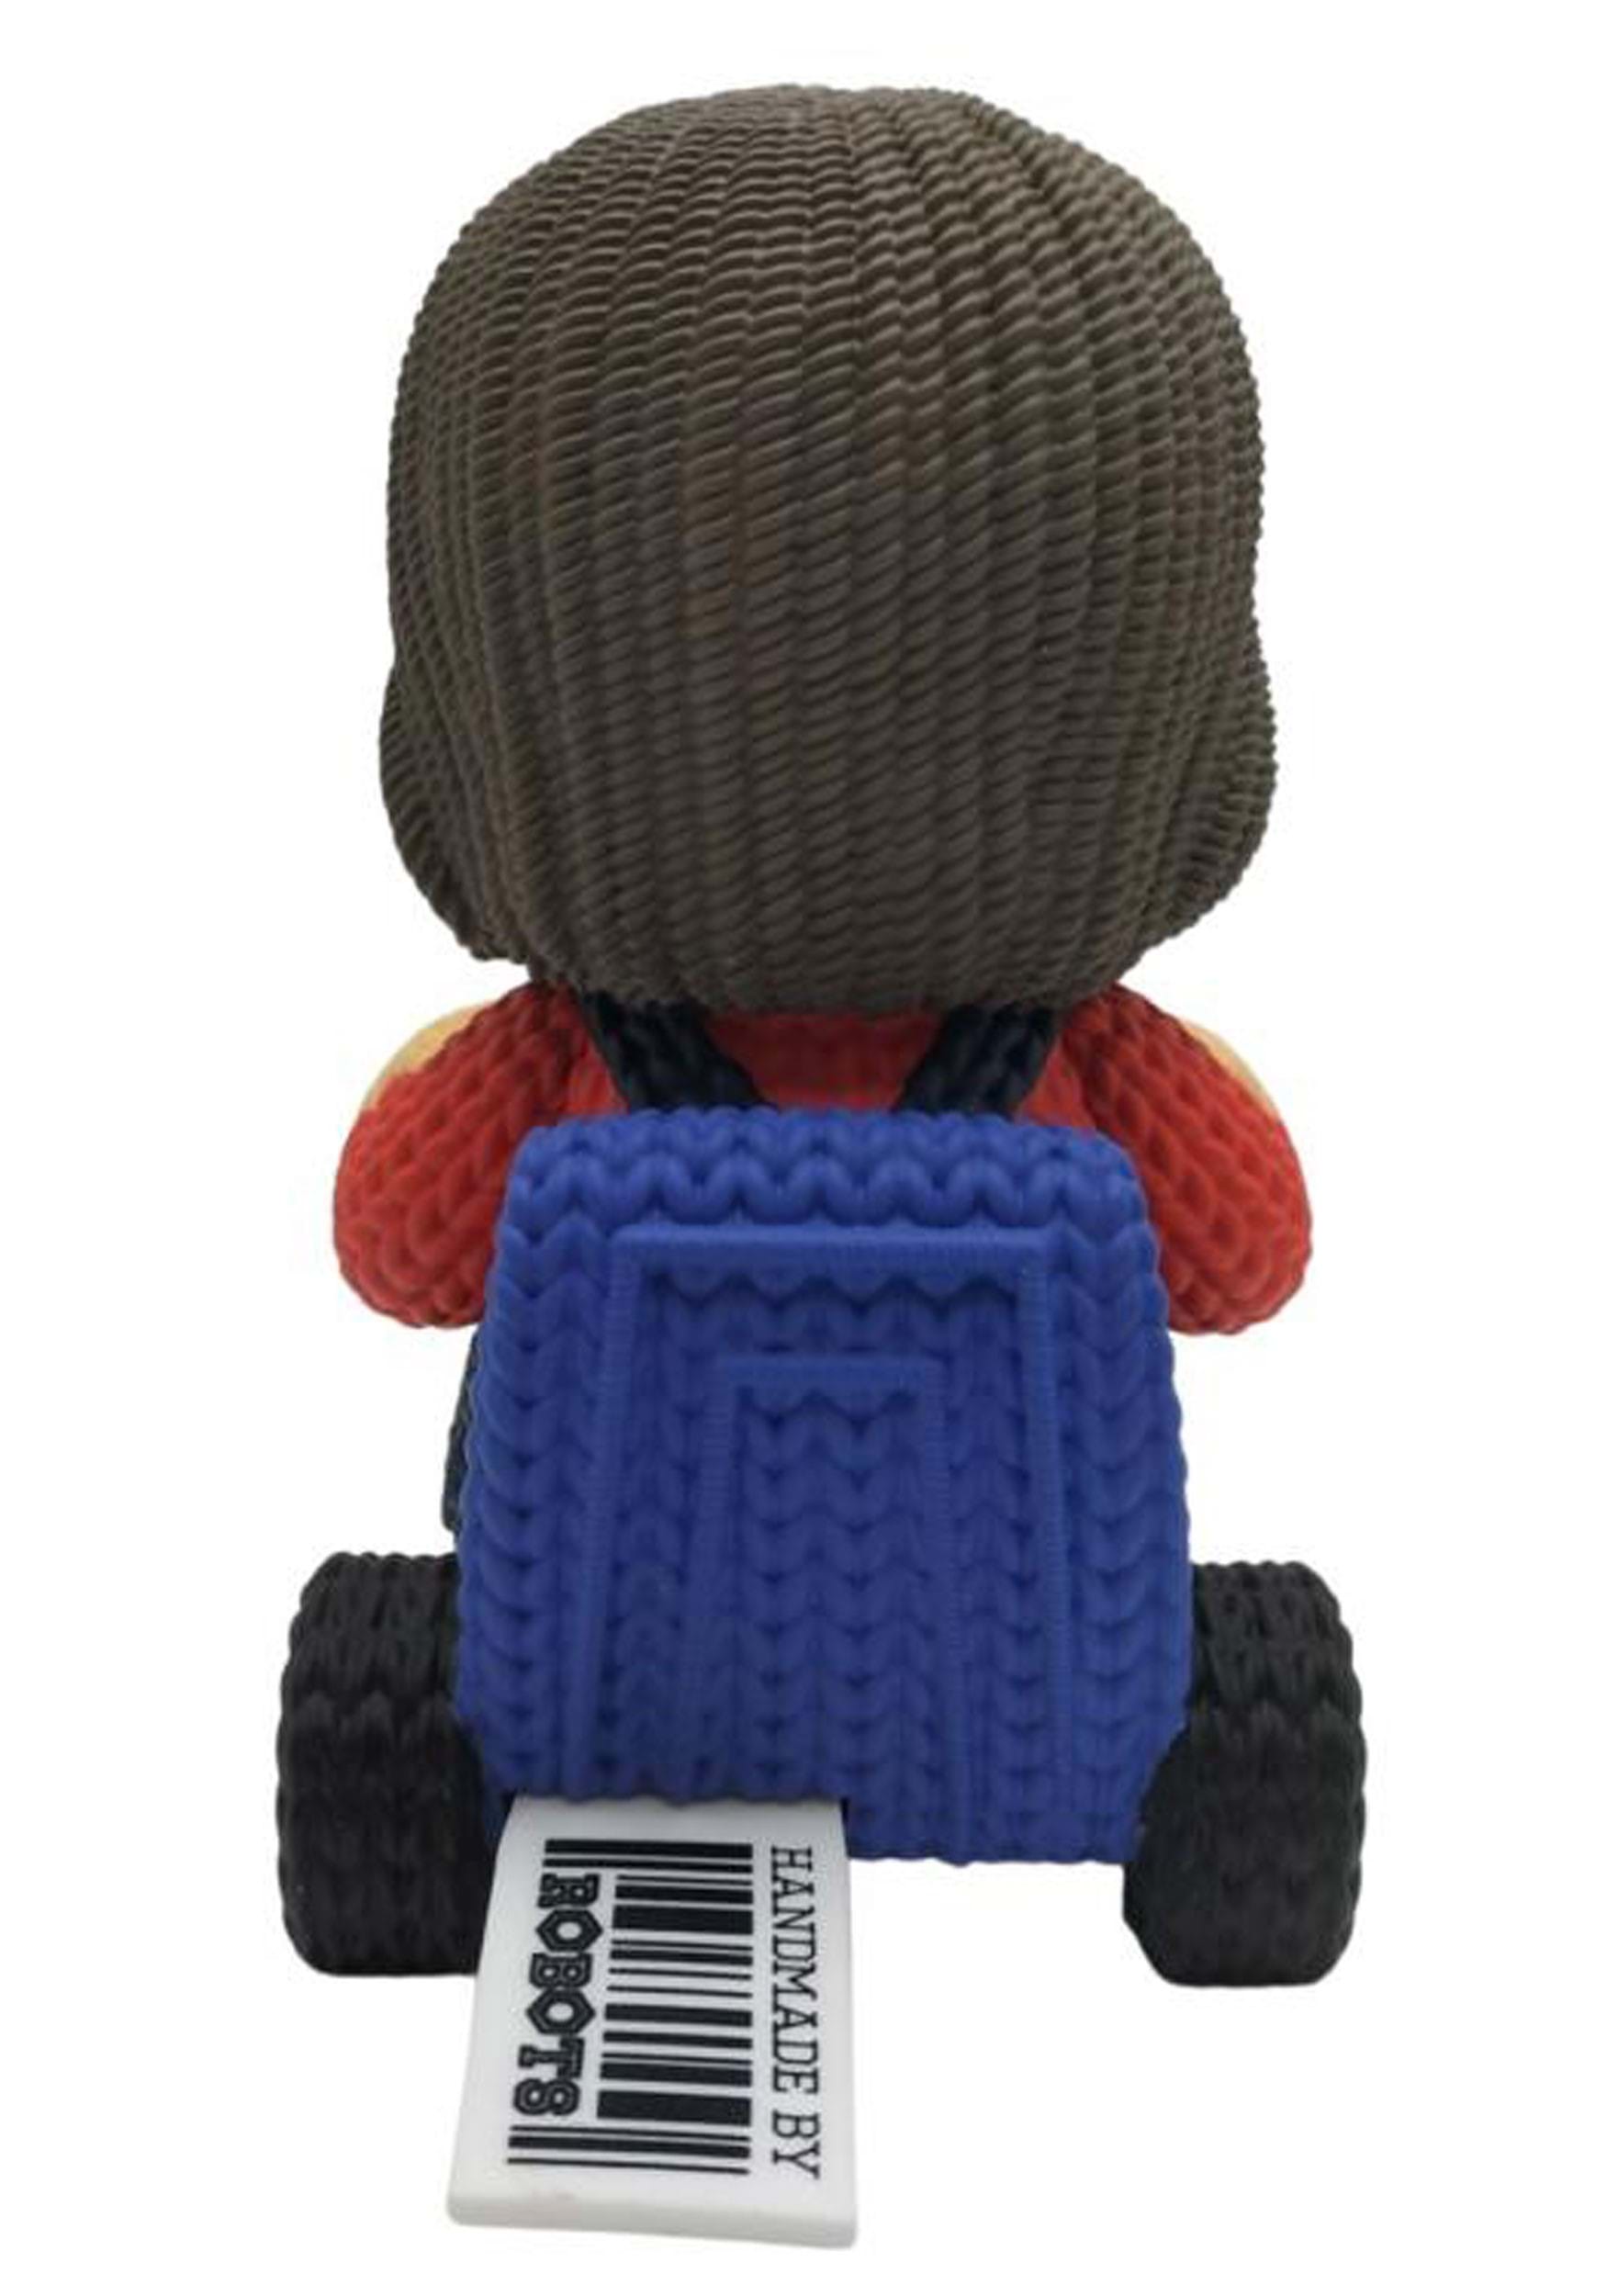 Handmade By Robots Danny On Tricycle Vinyl Figure